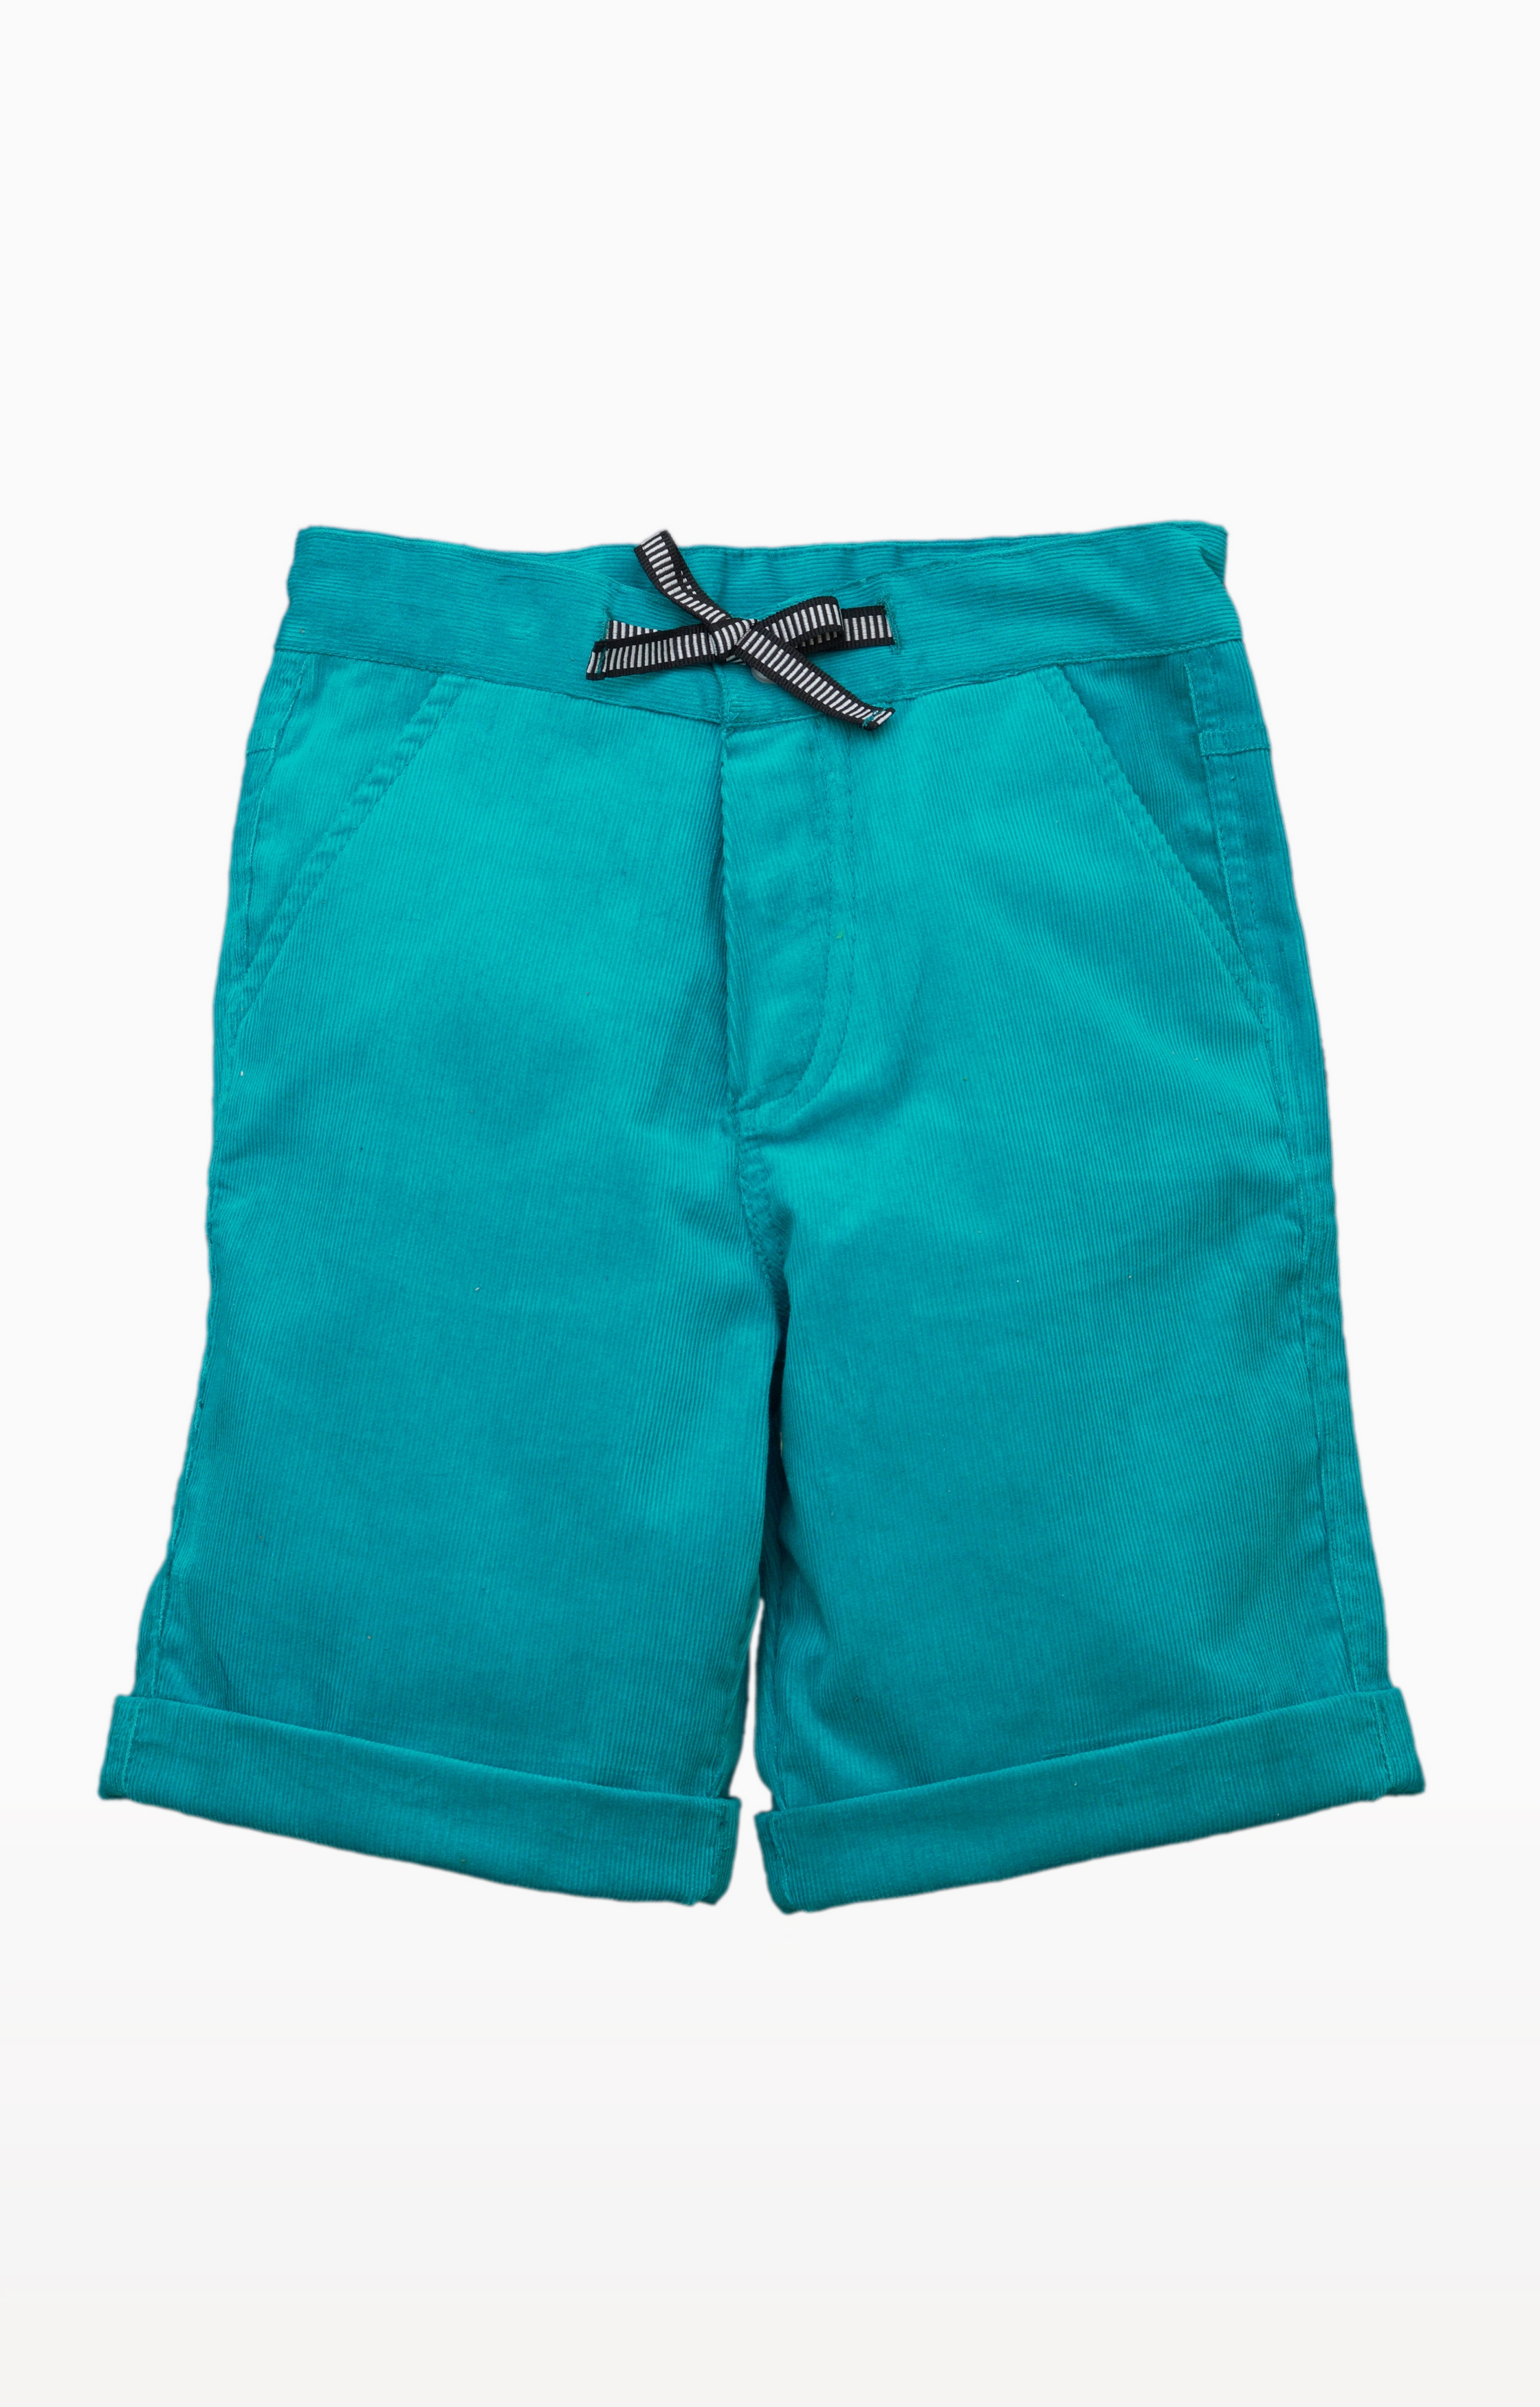 Popsicles Clothing | Popsicles Teal Shorts Regular Fit For Boys